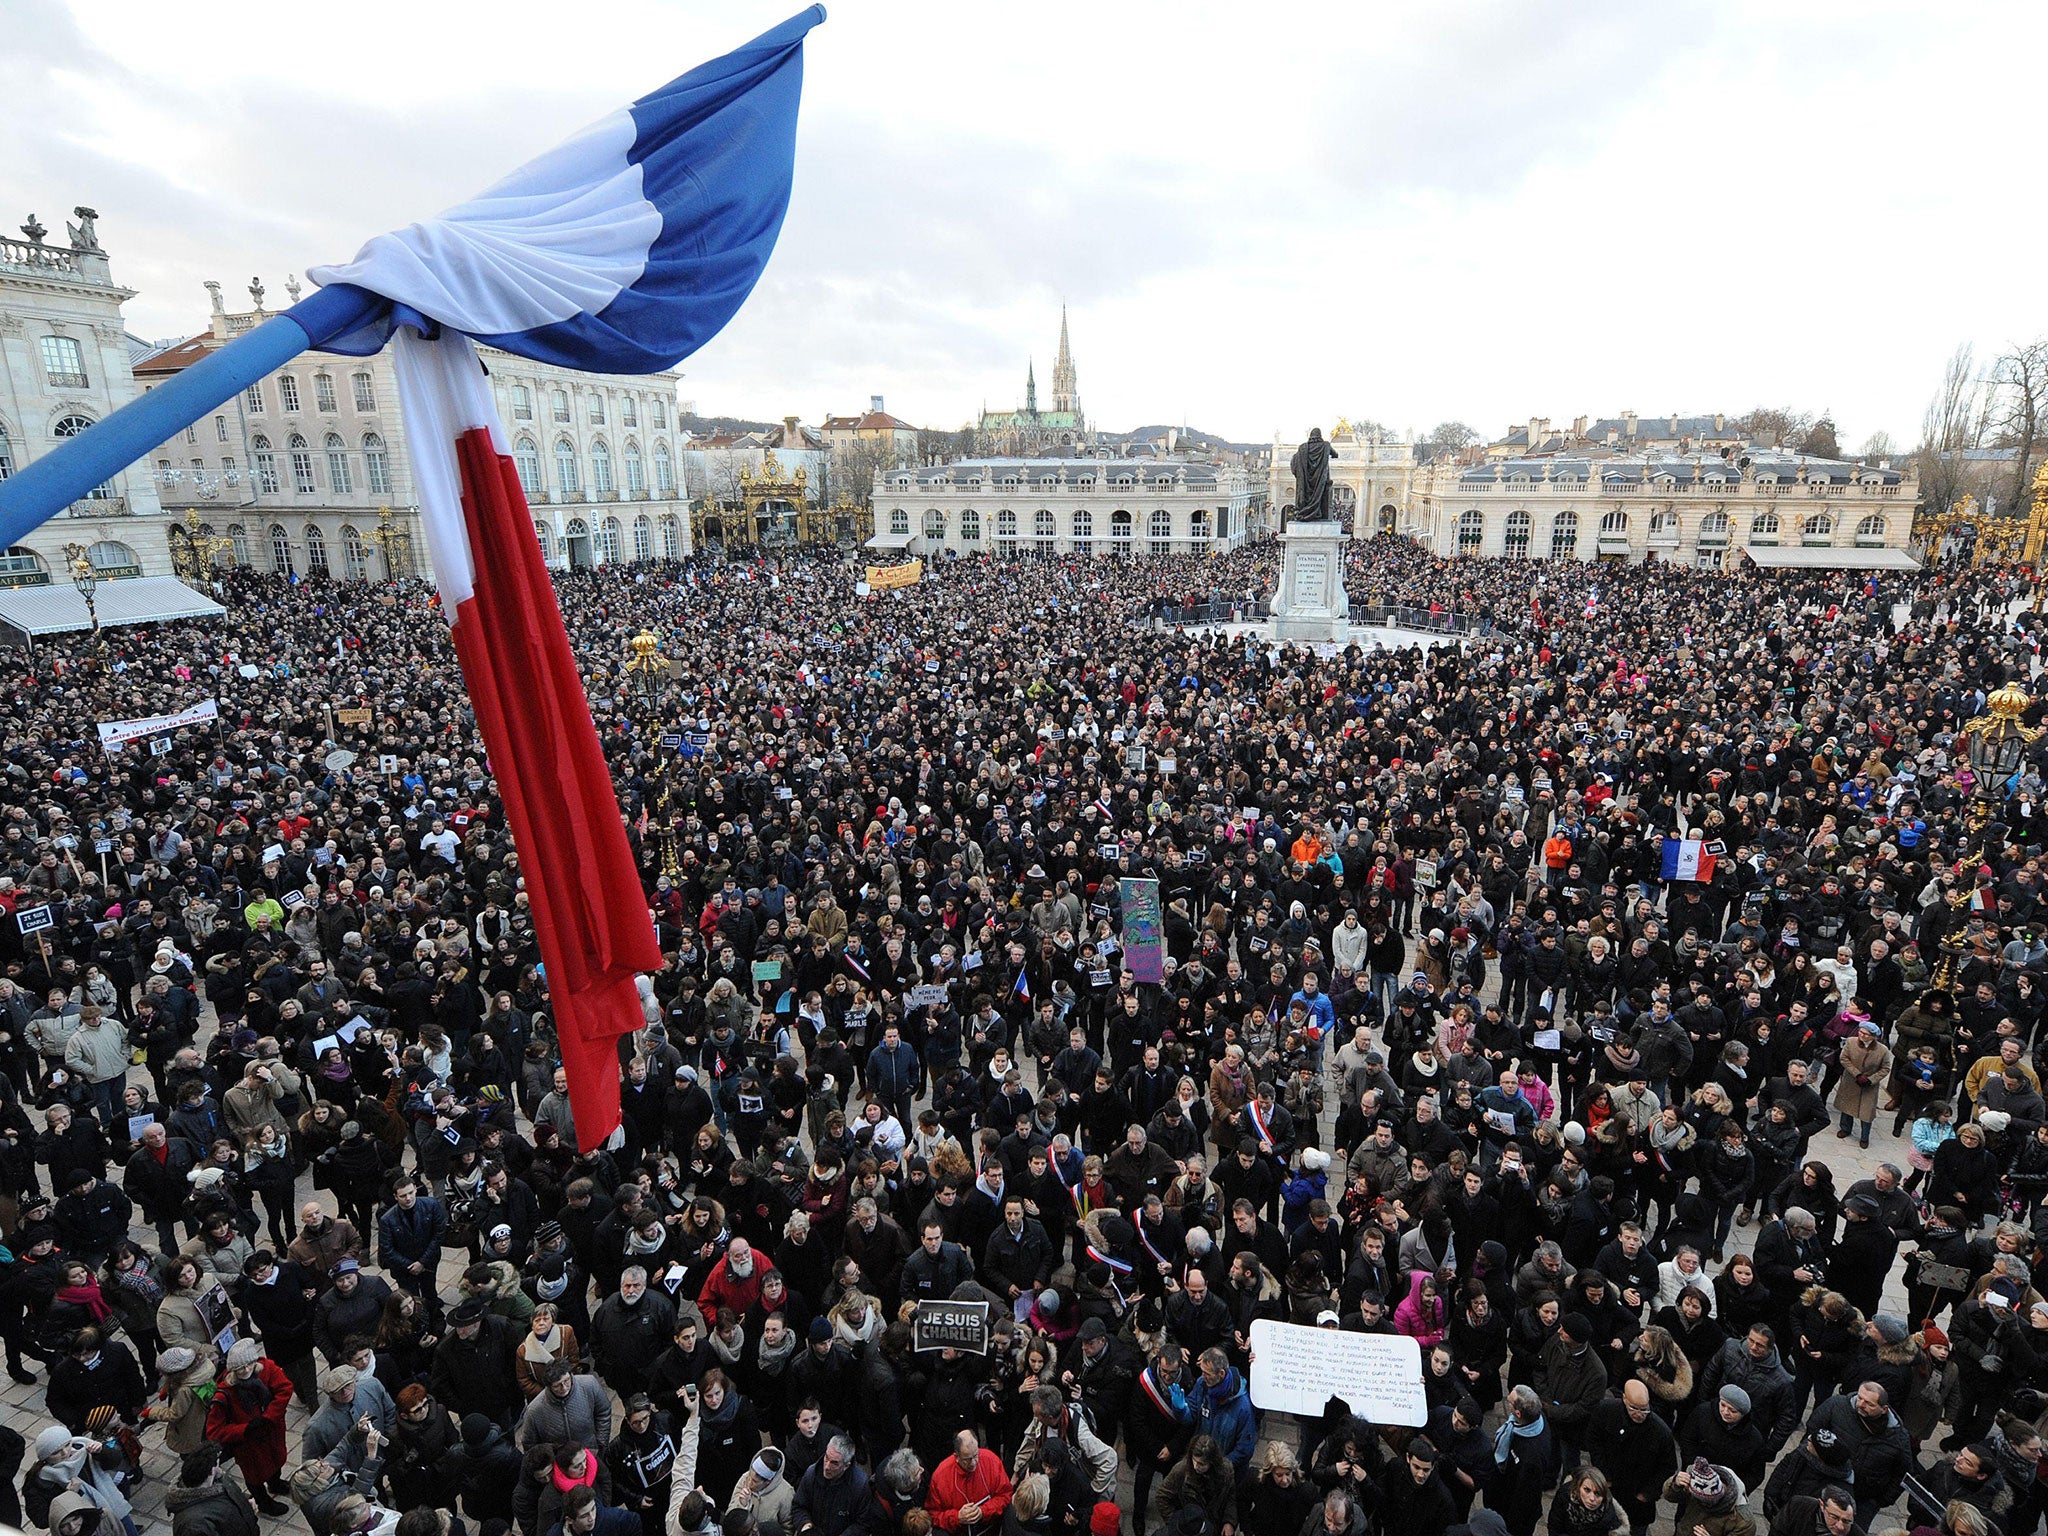 People marched in a rally for unity and in tribute to the victims of the recent terrorist attacks in Paris